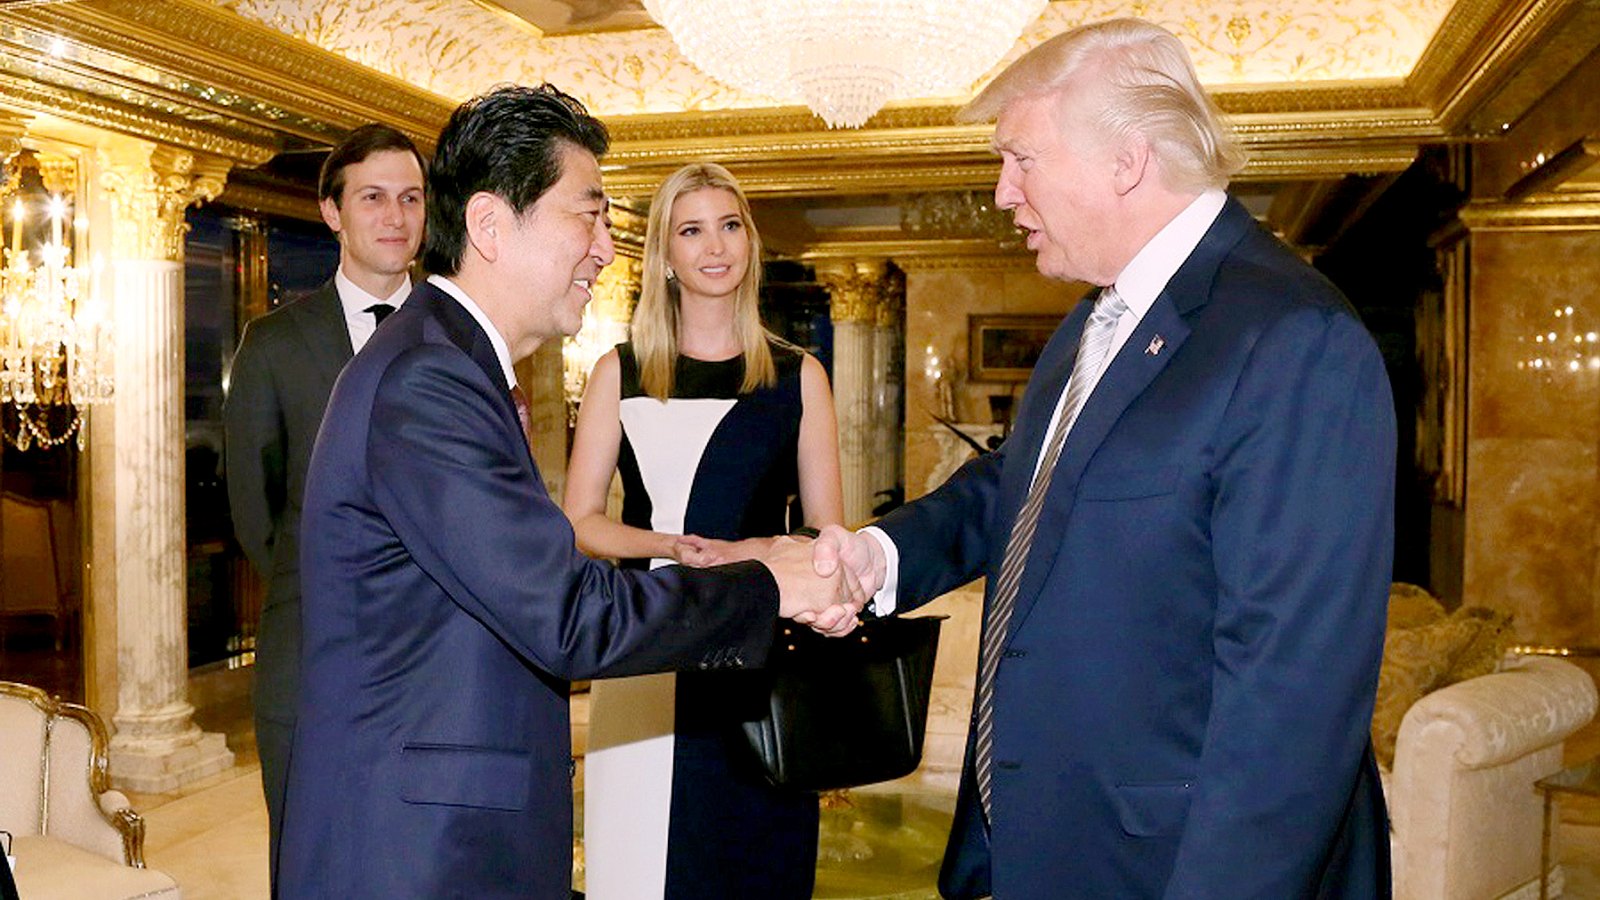 Japanese Prime Minister Shinzo Abe, front left, shakes hands with U.S. President-elect Donald Trump during a meeting as Ivanka Trump, back right, the oldest daughter of Donald Trump, and her husband, Jared Kushner, back left.